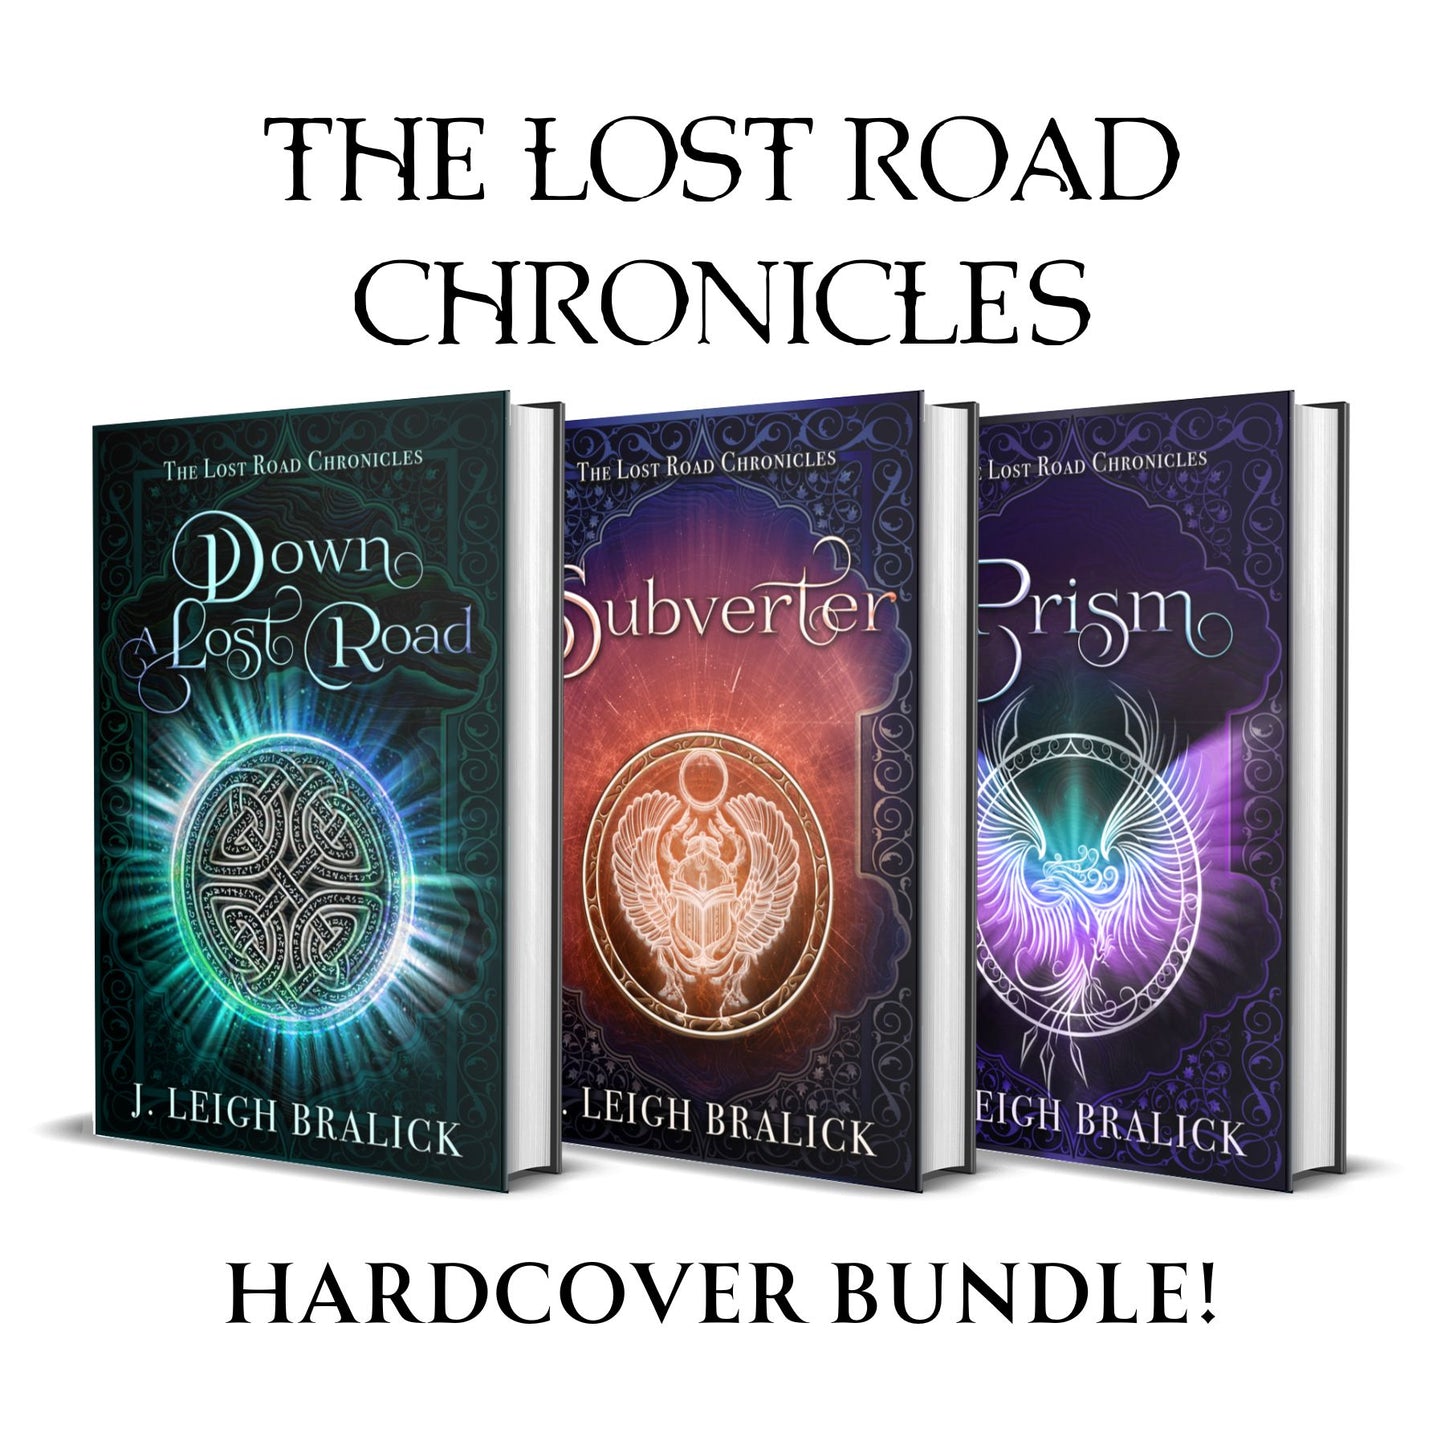 The Lost Road Chronicles Hardcover Bundle